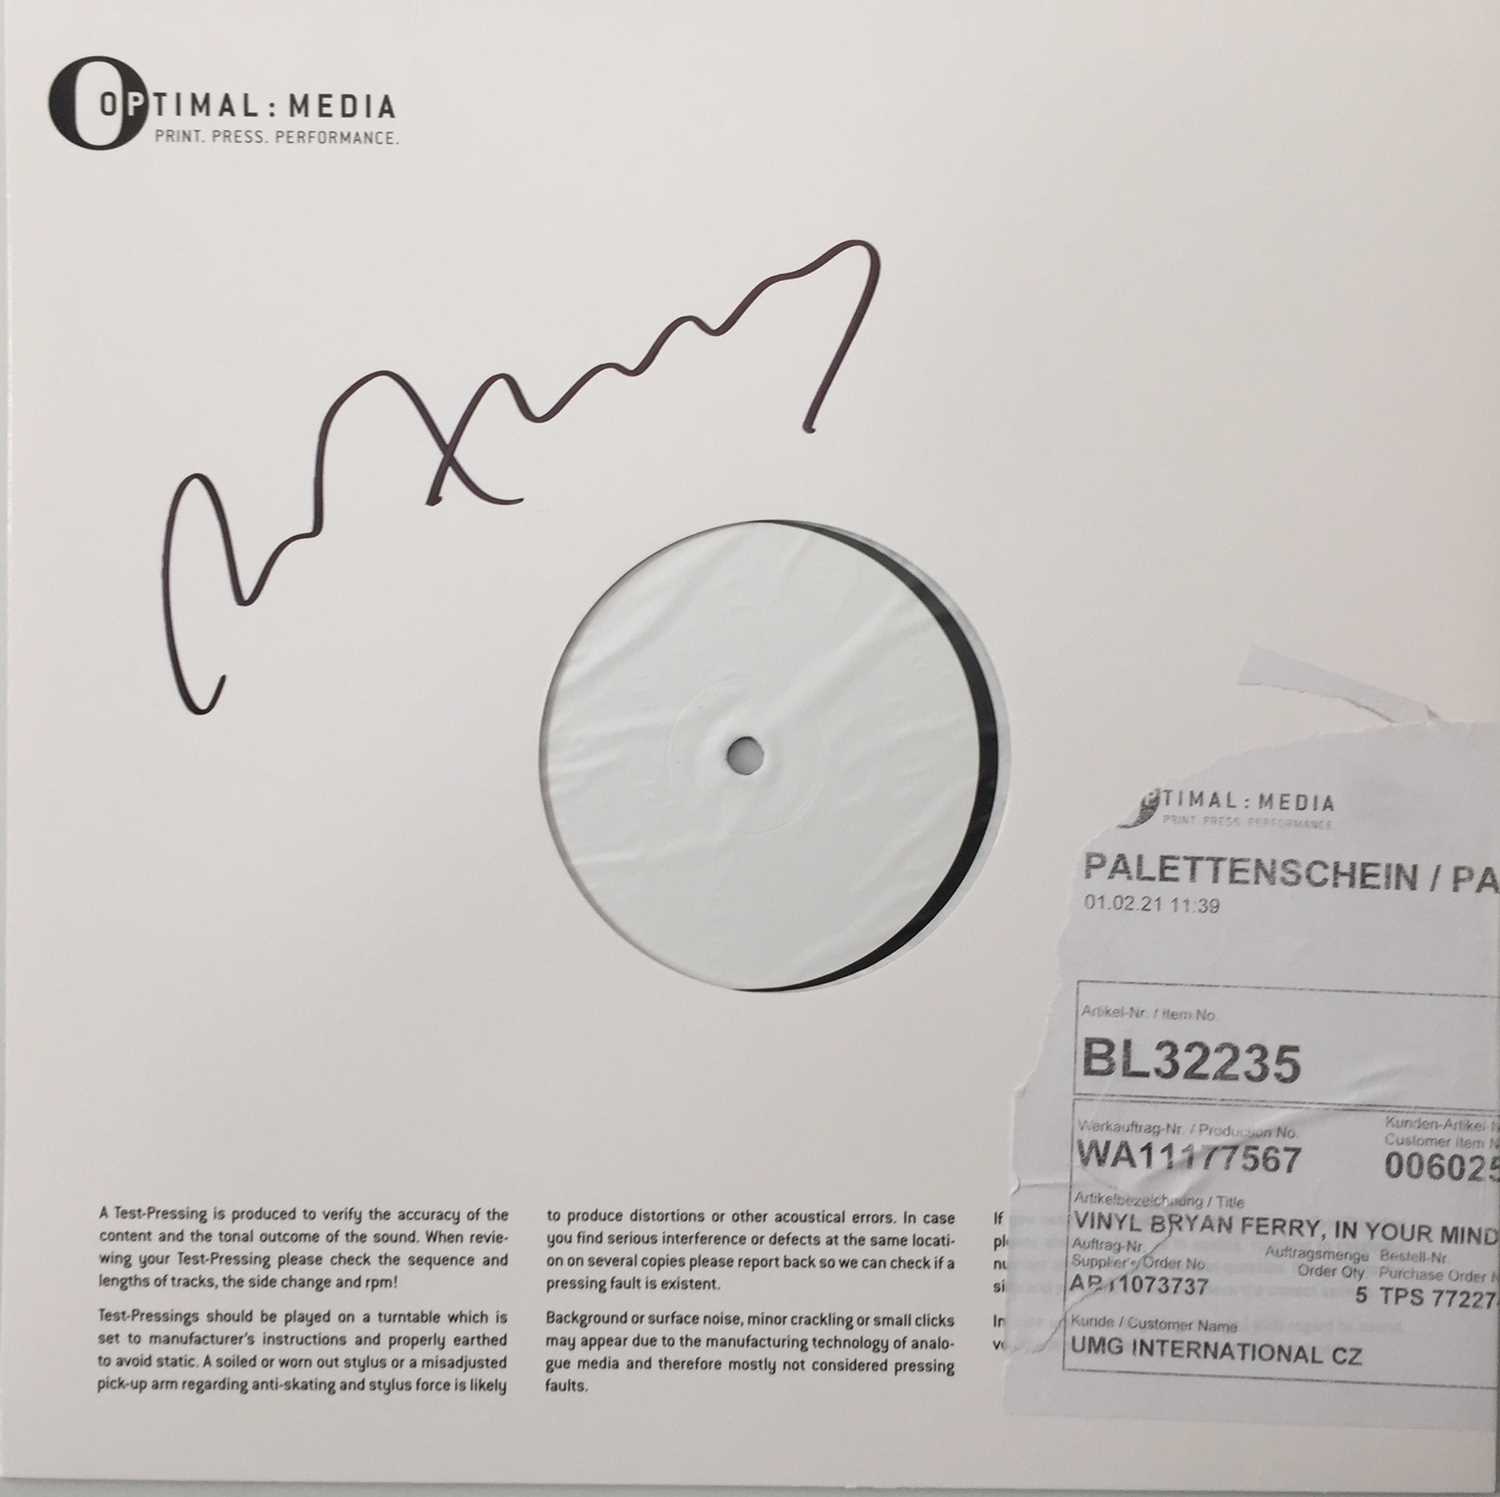 Lot 26 - BRYAN FERRY - IN YOUR MIND (2016 SIGNED TEST PRESSING - BFLP4)